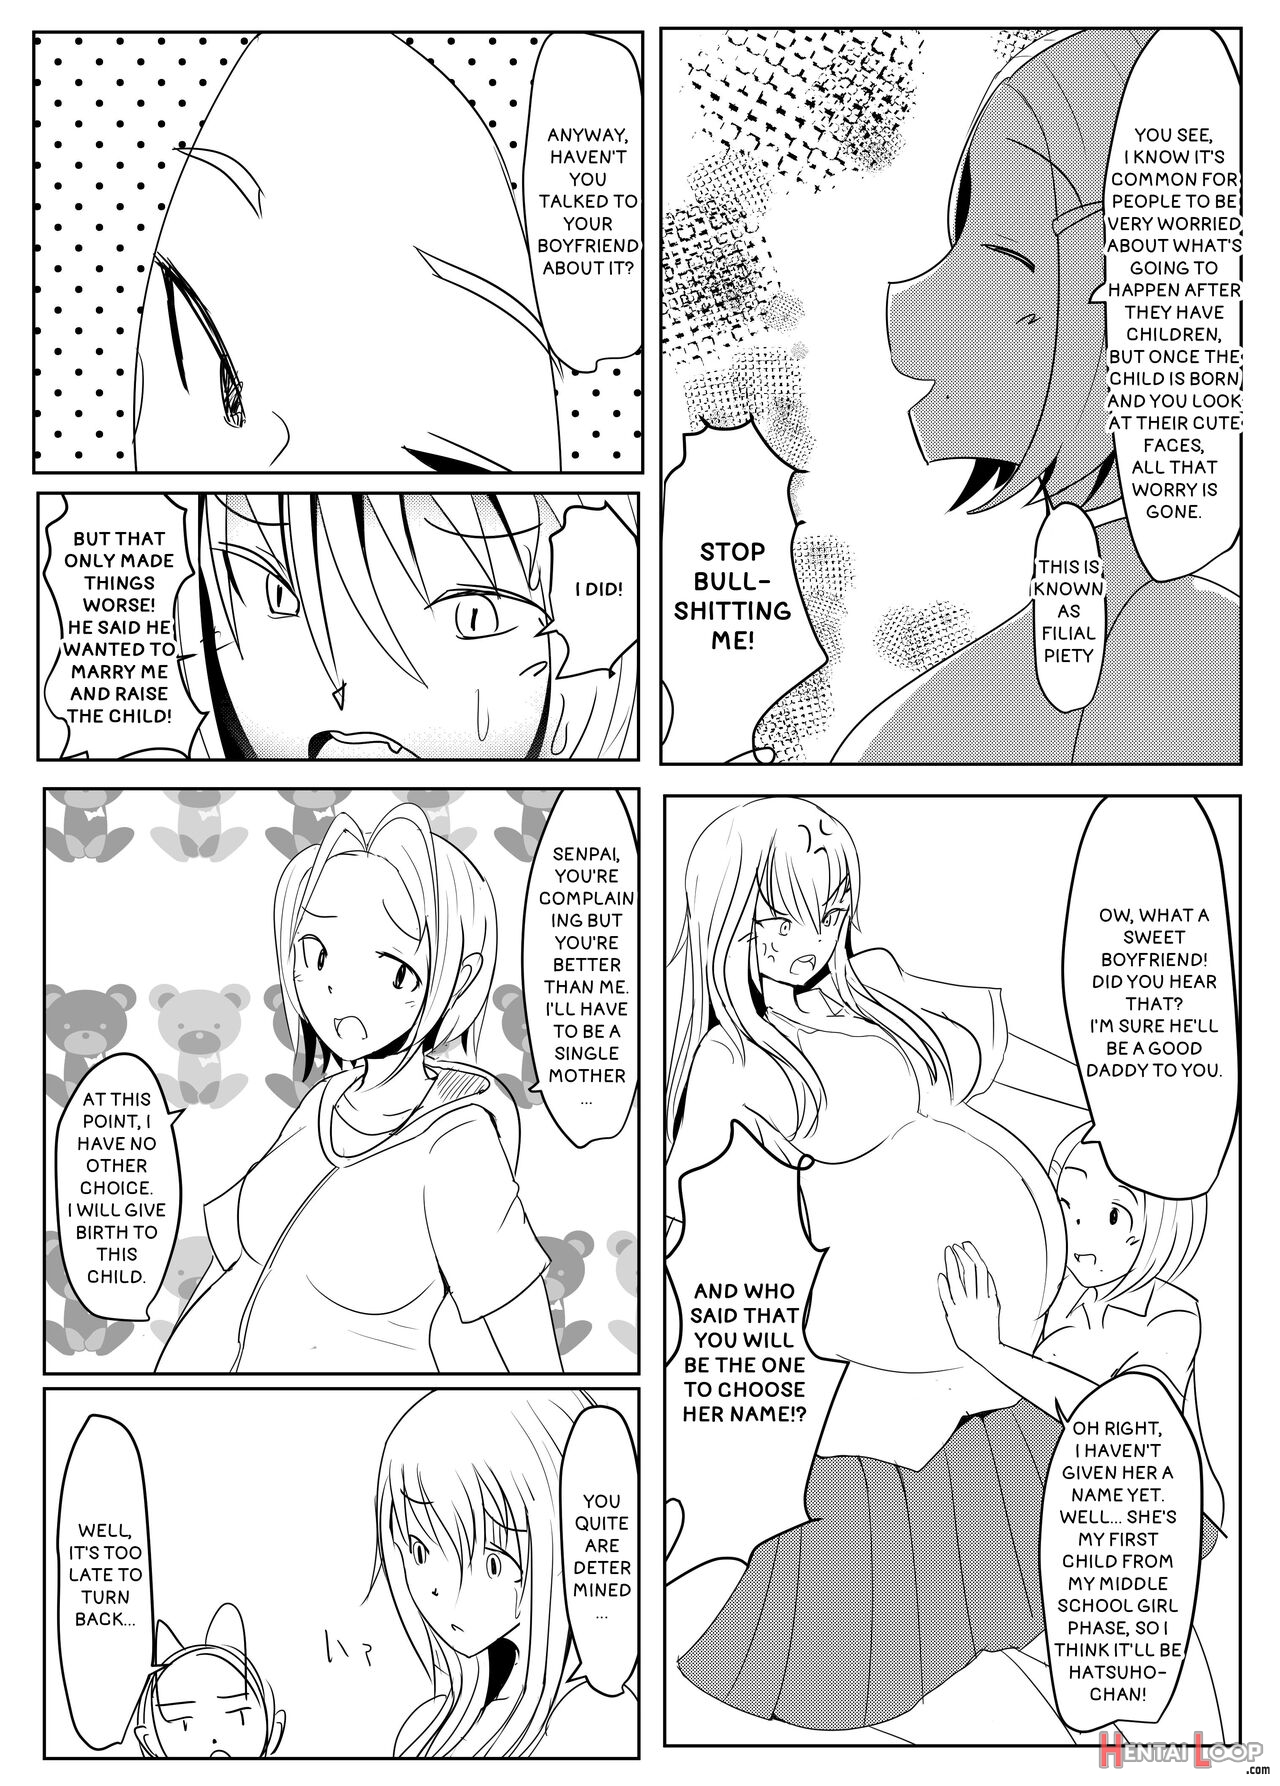 The Mating Diary Of An Easy Futanari Girl ~girls-only Breeding Meeting - Part Three, Ep 2~ page 8